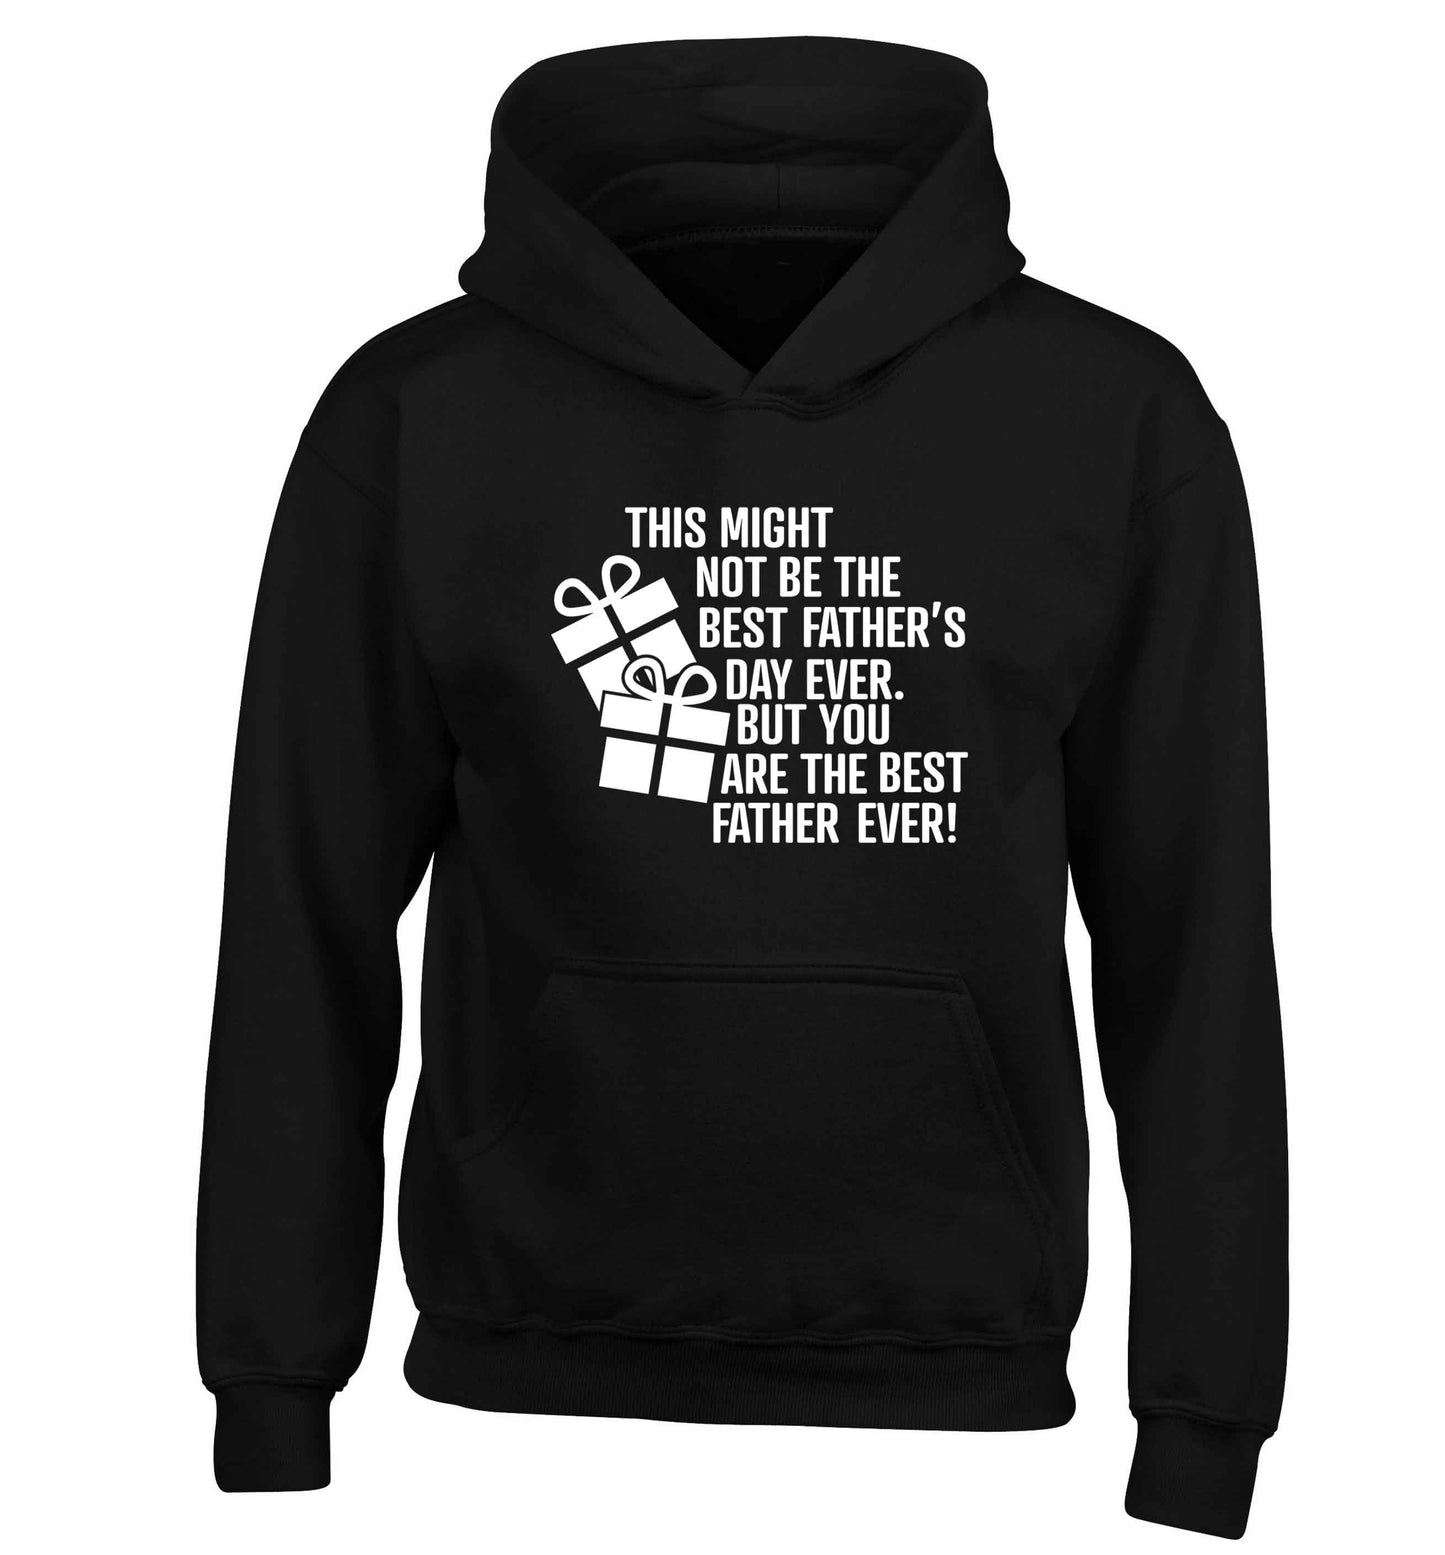 It might not be the best Father's Day ever but you are the best father ever! children's black hoodie 12-13 Years